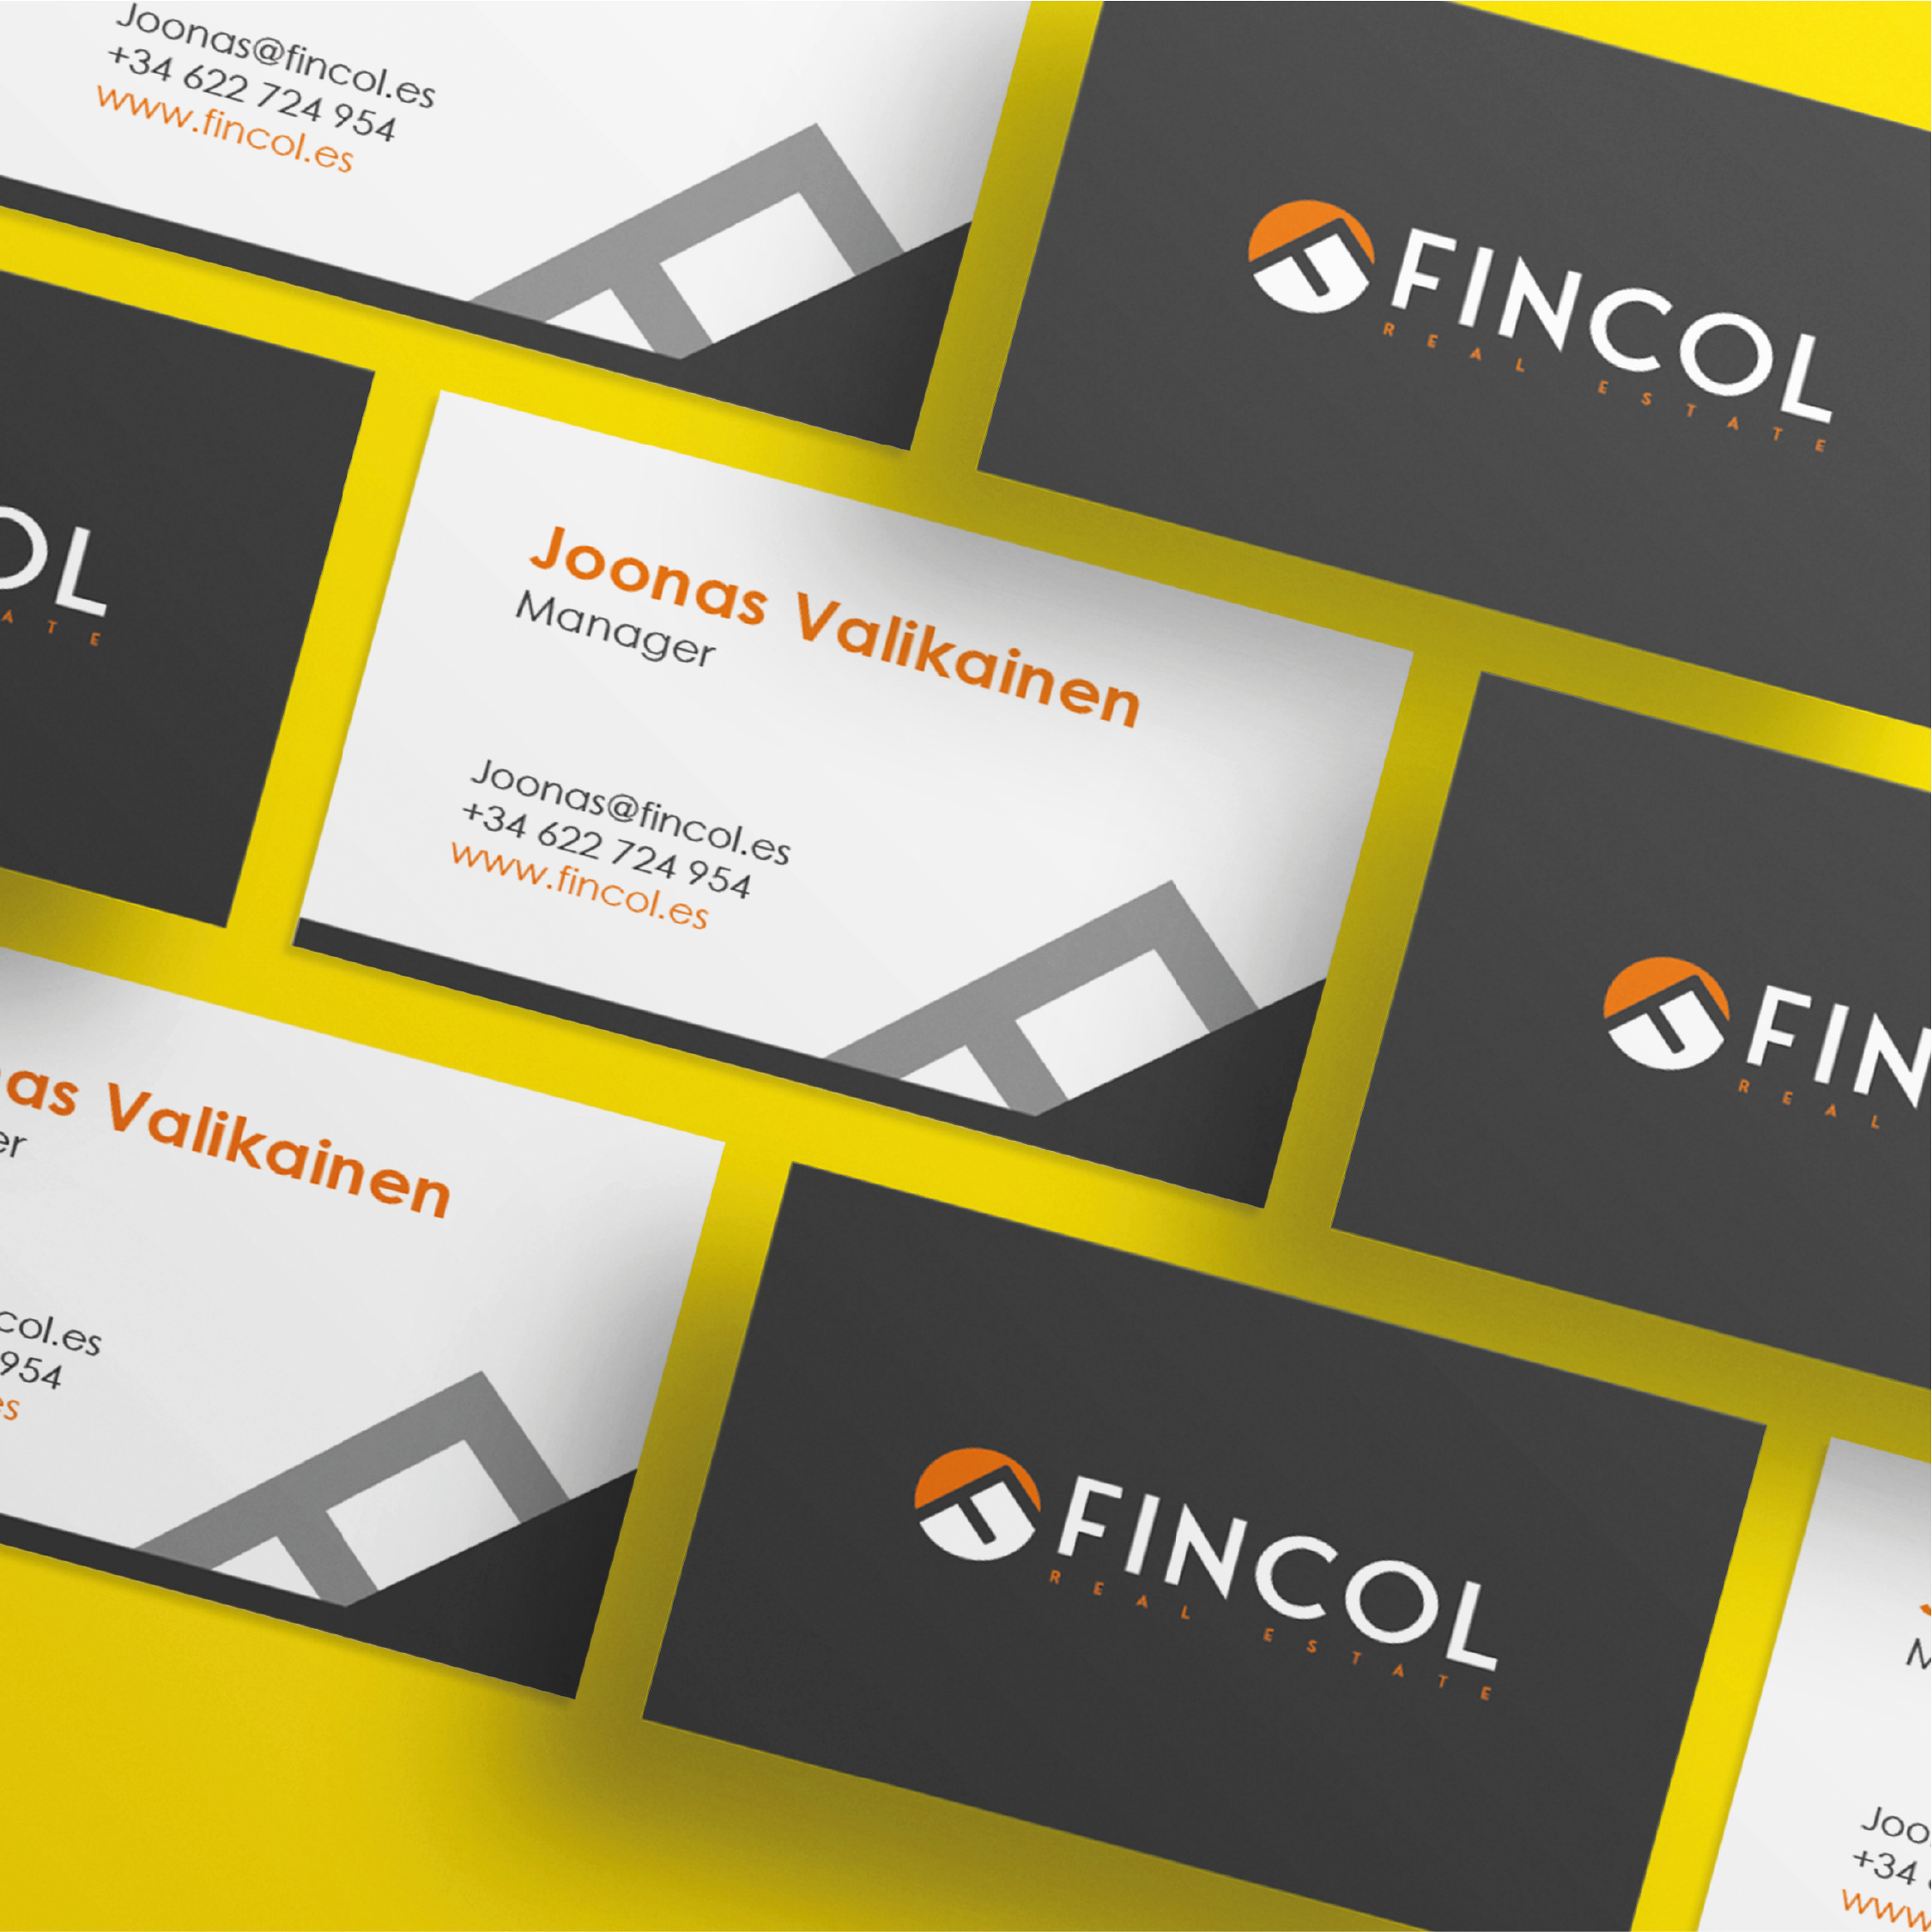 Business cards for Fincol Estate